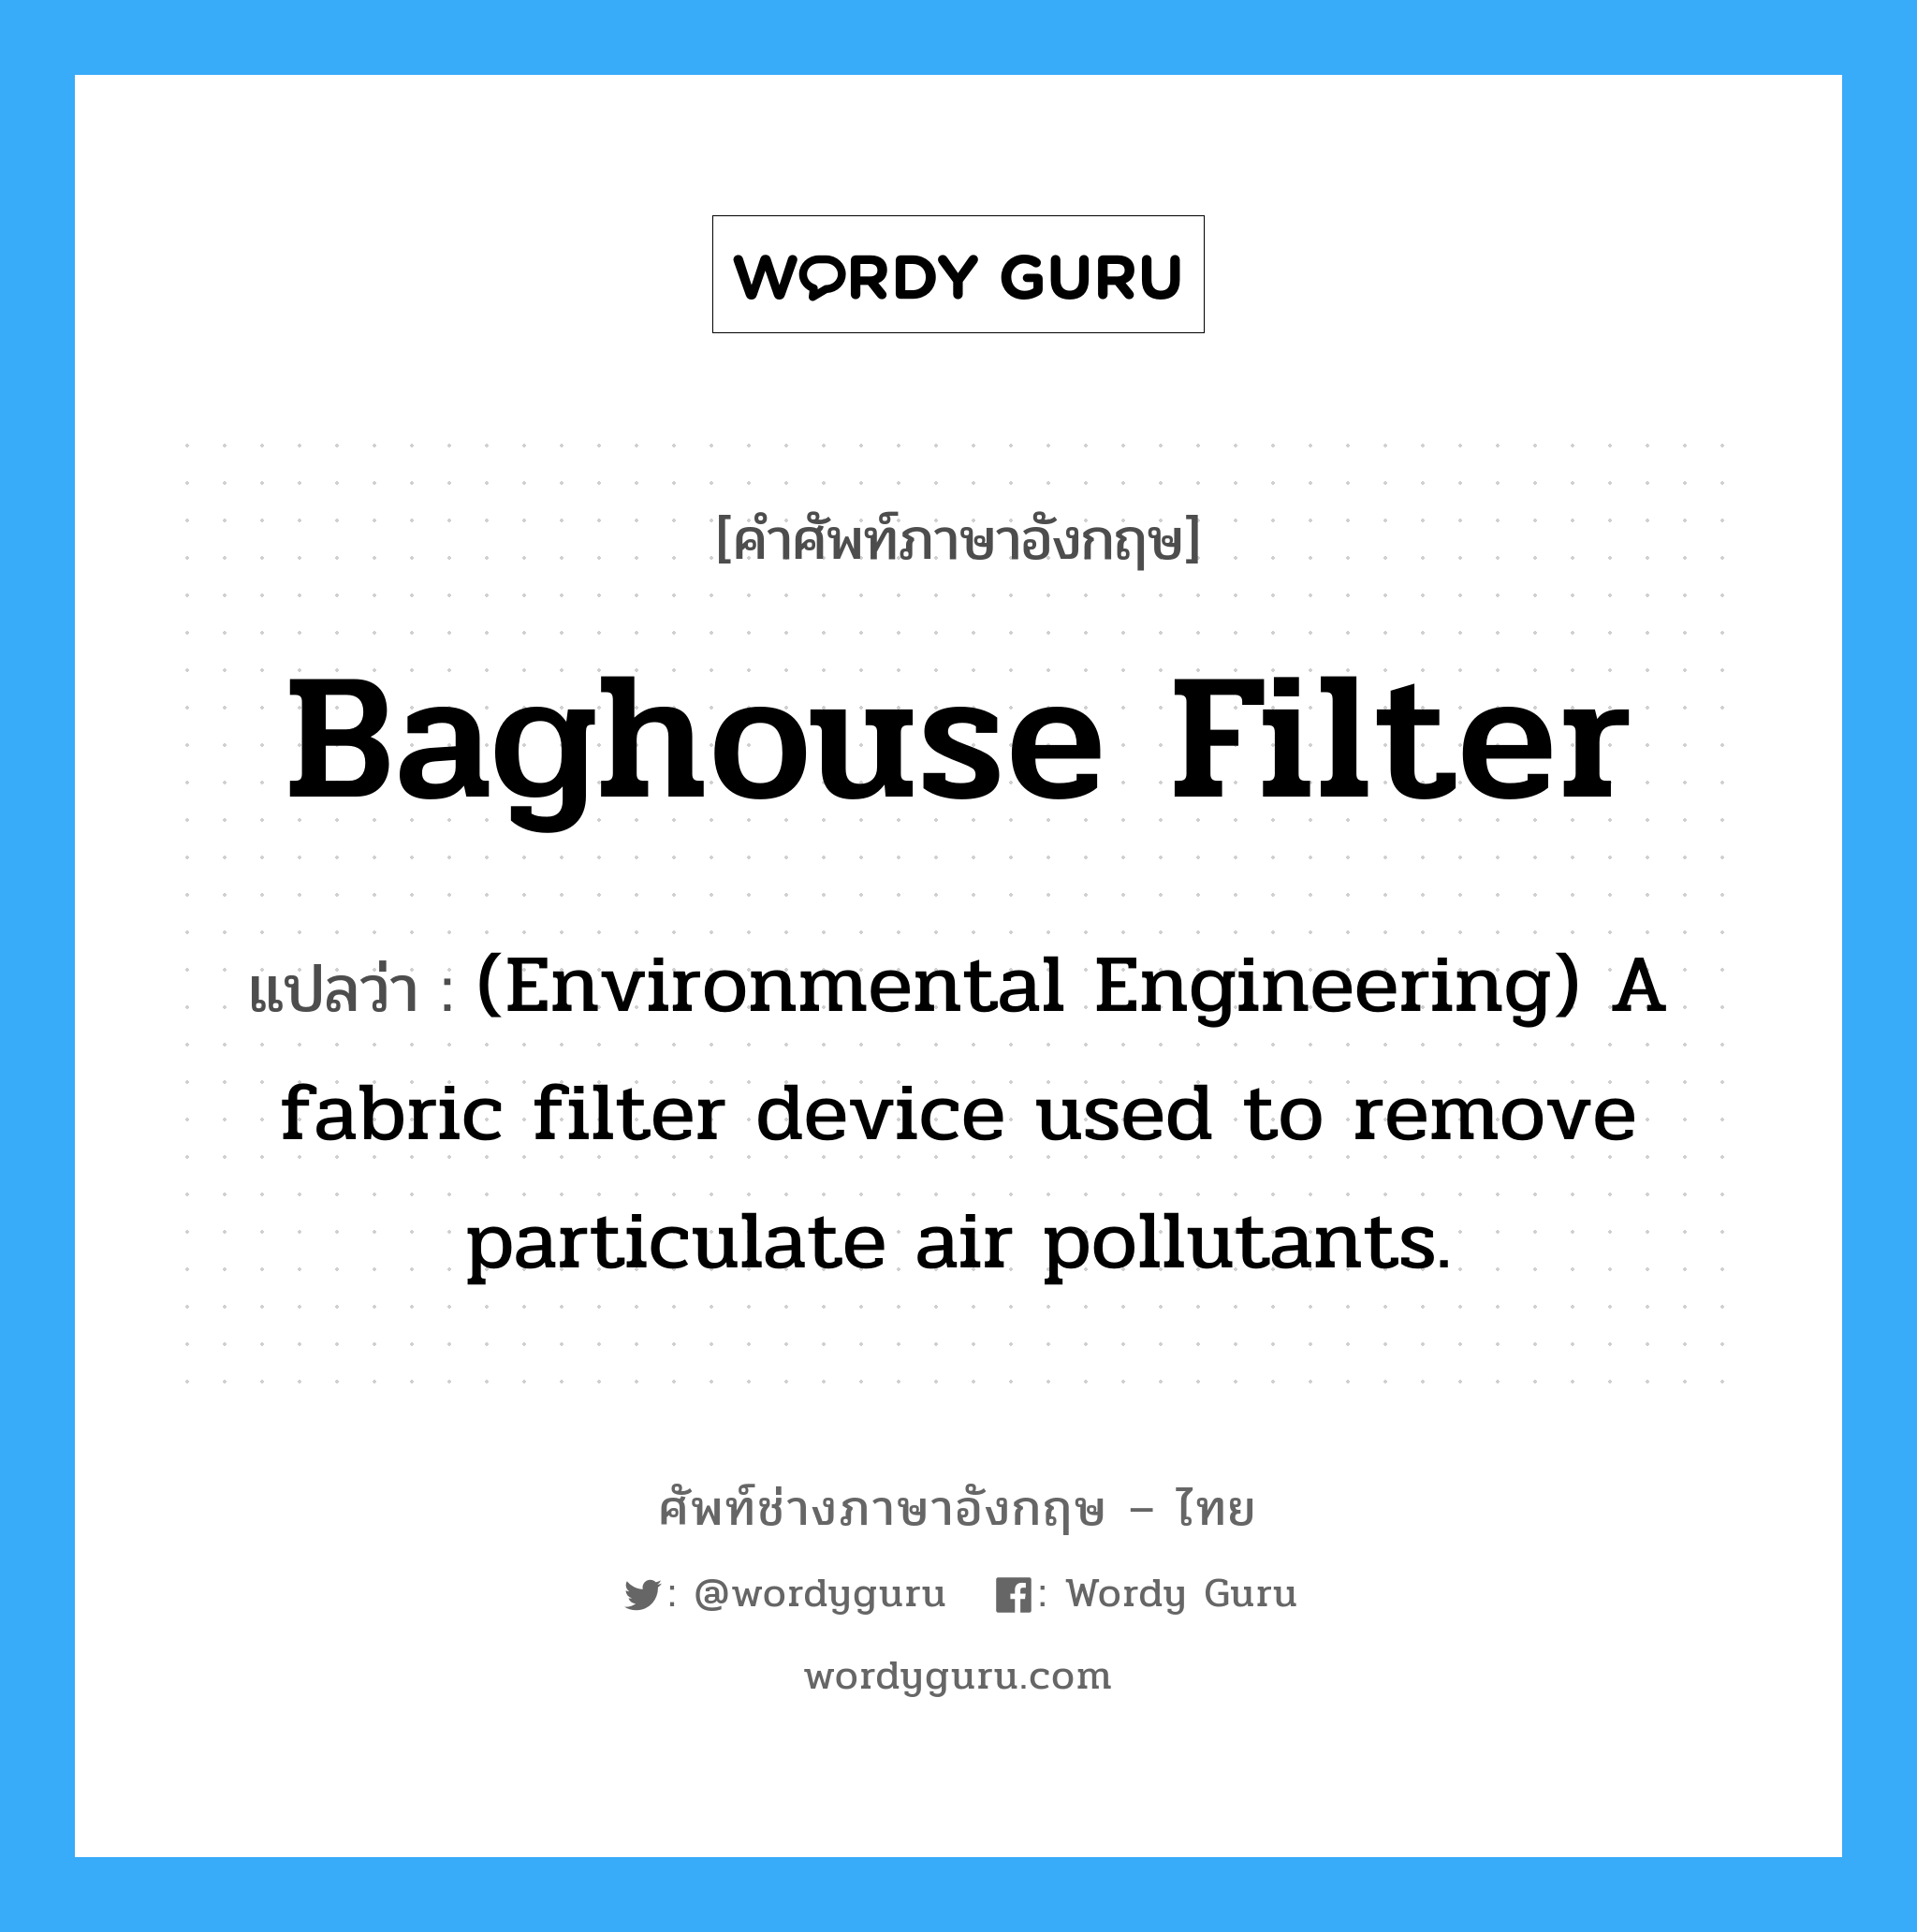 (Environmental Engineering) A fabric filter device used to remove particulate air pollutants. ภาษาอังกฤษ?, คำศัพท์ช่างภาษาอังกฤษ - ไทย (Environmental Engineering) A fabric filter device used to remove particulate air pollutants. คำศัพท์ภาษาอังกฤษ (Environmental Engineering) A fabric filter device used to remove particulate air pollutants. แปลว่า Baghouse filter